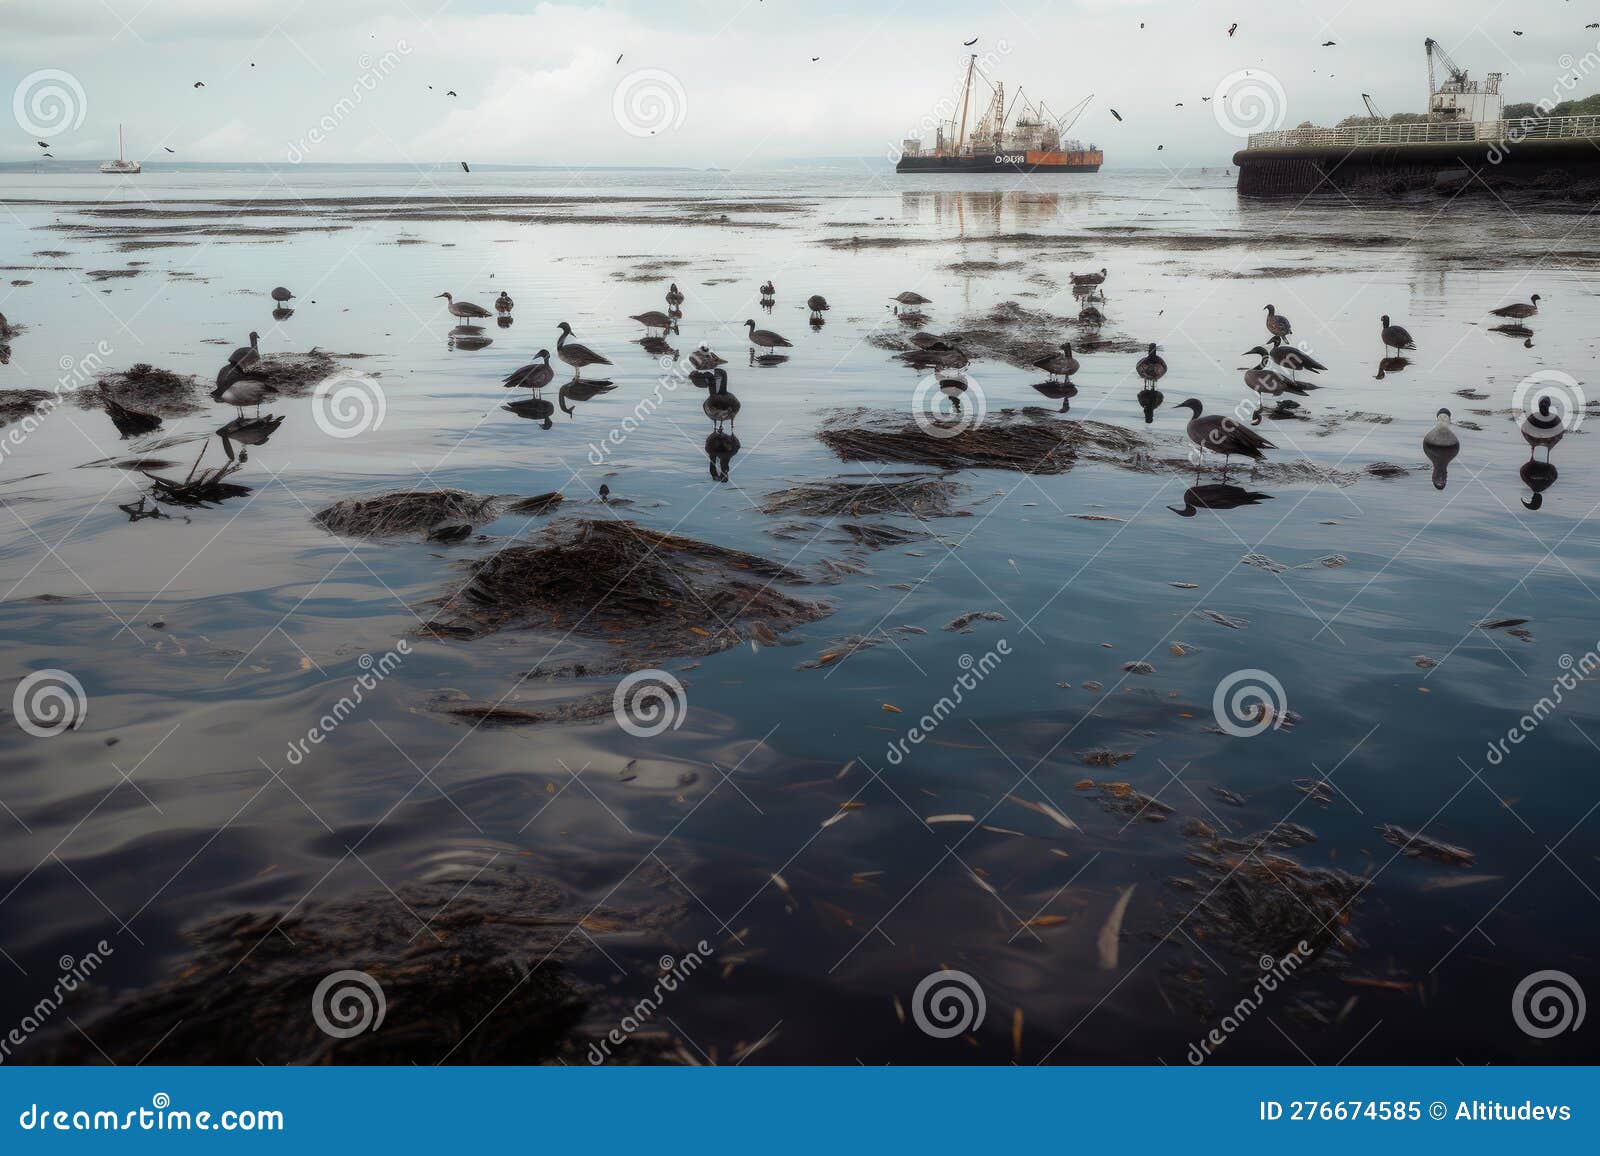 oil spill in the bay, with birds and fish swimming among the slicks